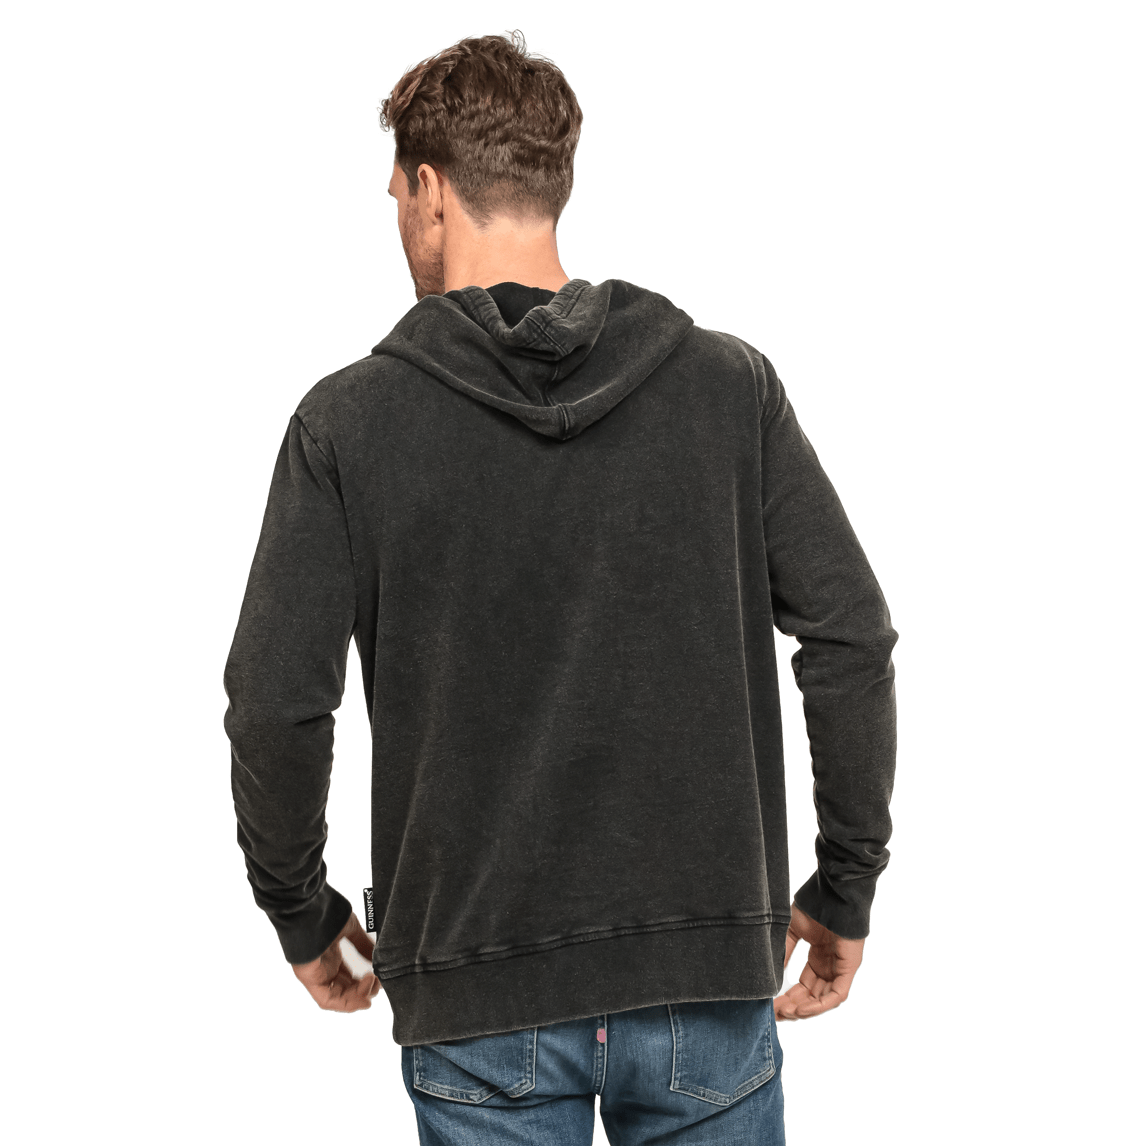 The back view of a man wearing a Guinness Premium Label Toucan Hoodie.